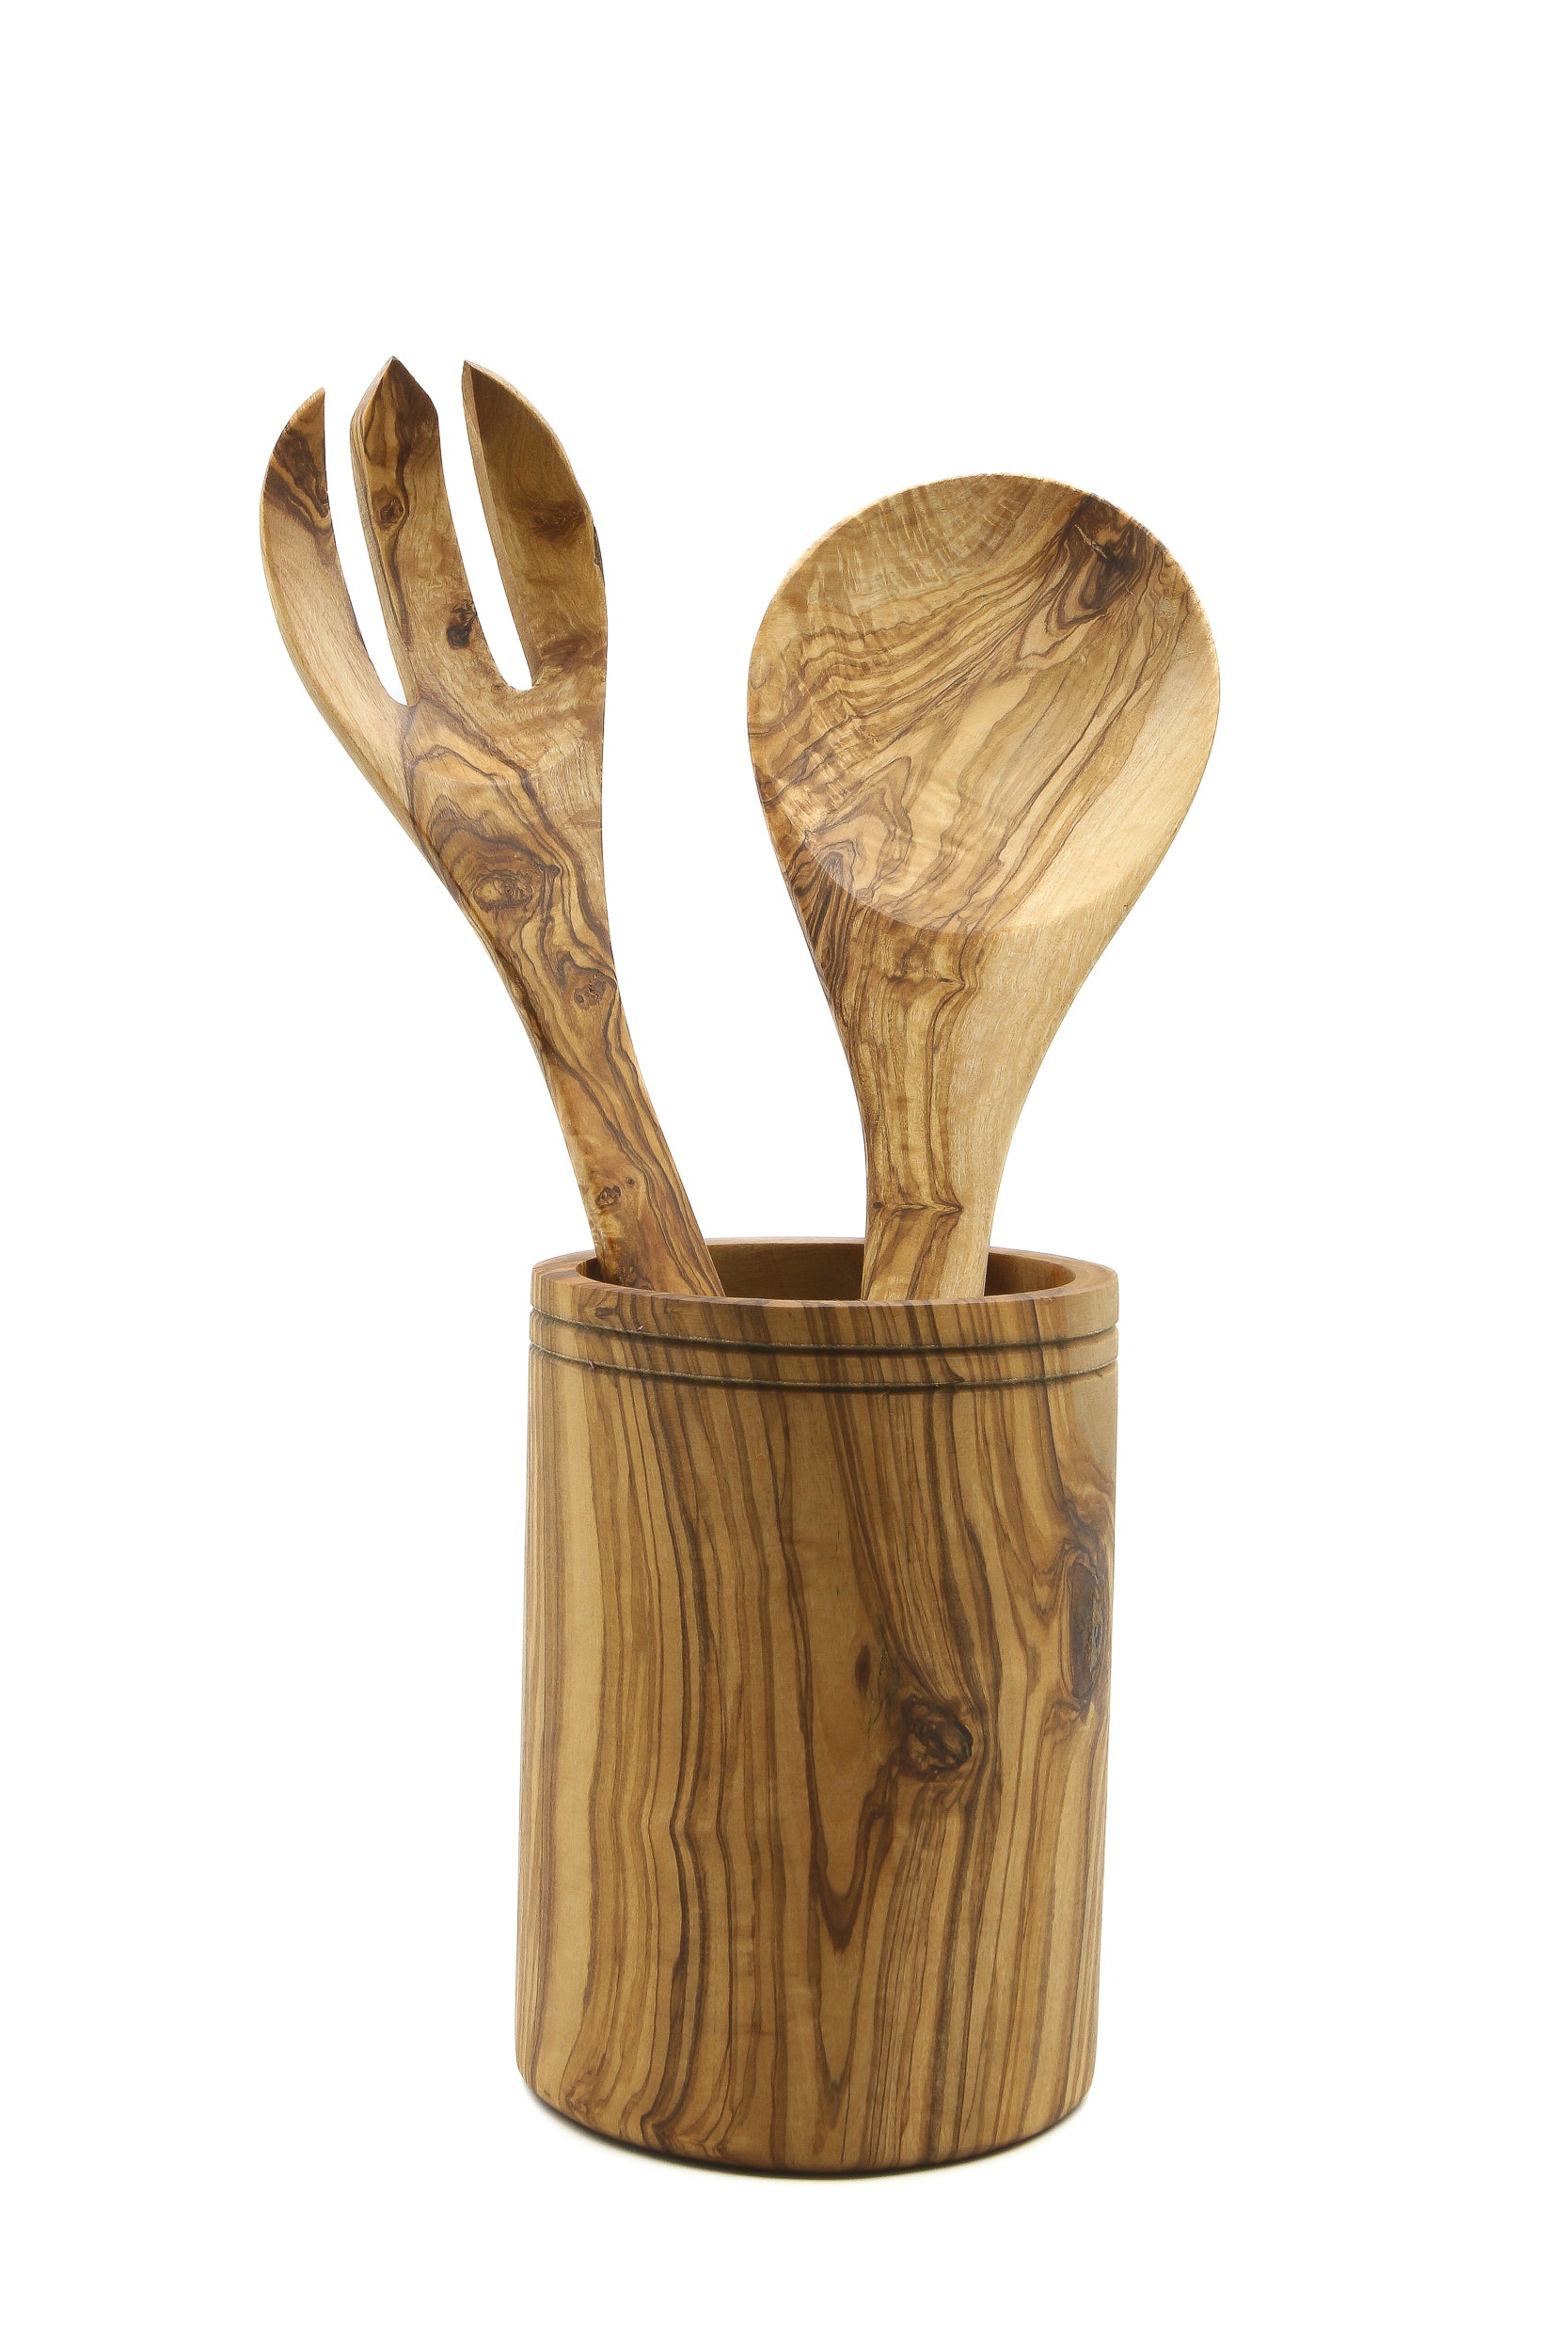 Handcrafted olive wood kitchenware utensils set with spoon, forks, strainer, ladle, and utensil holder